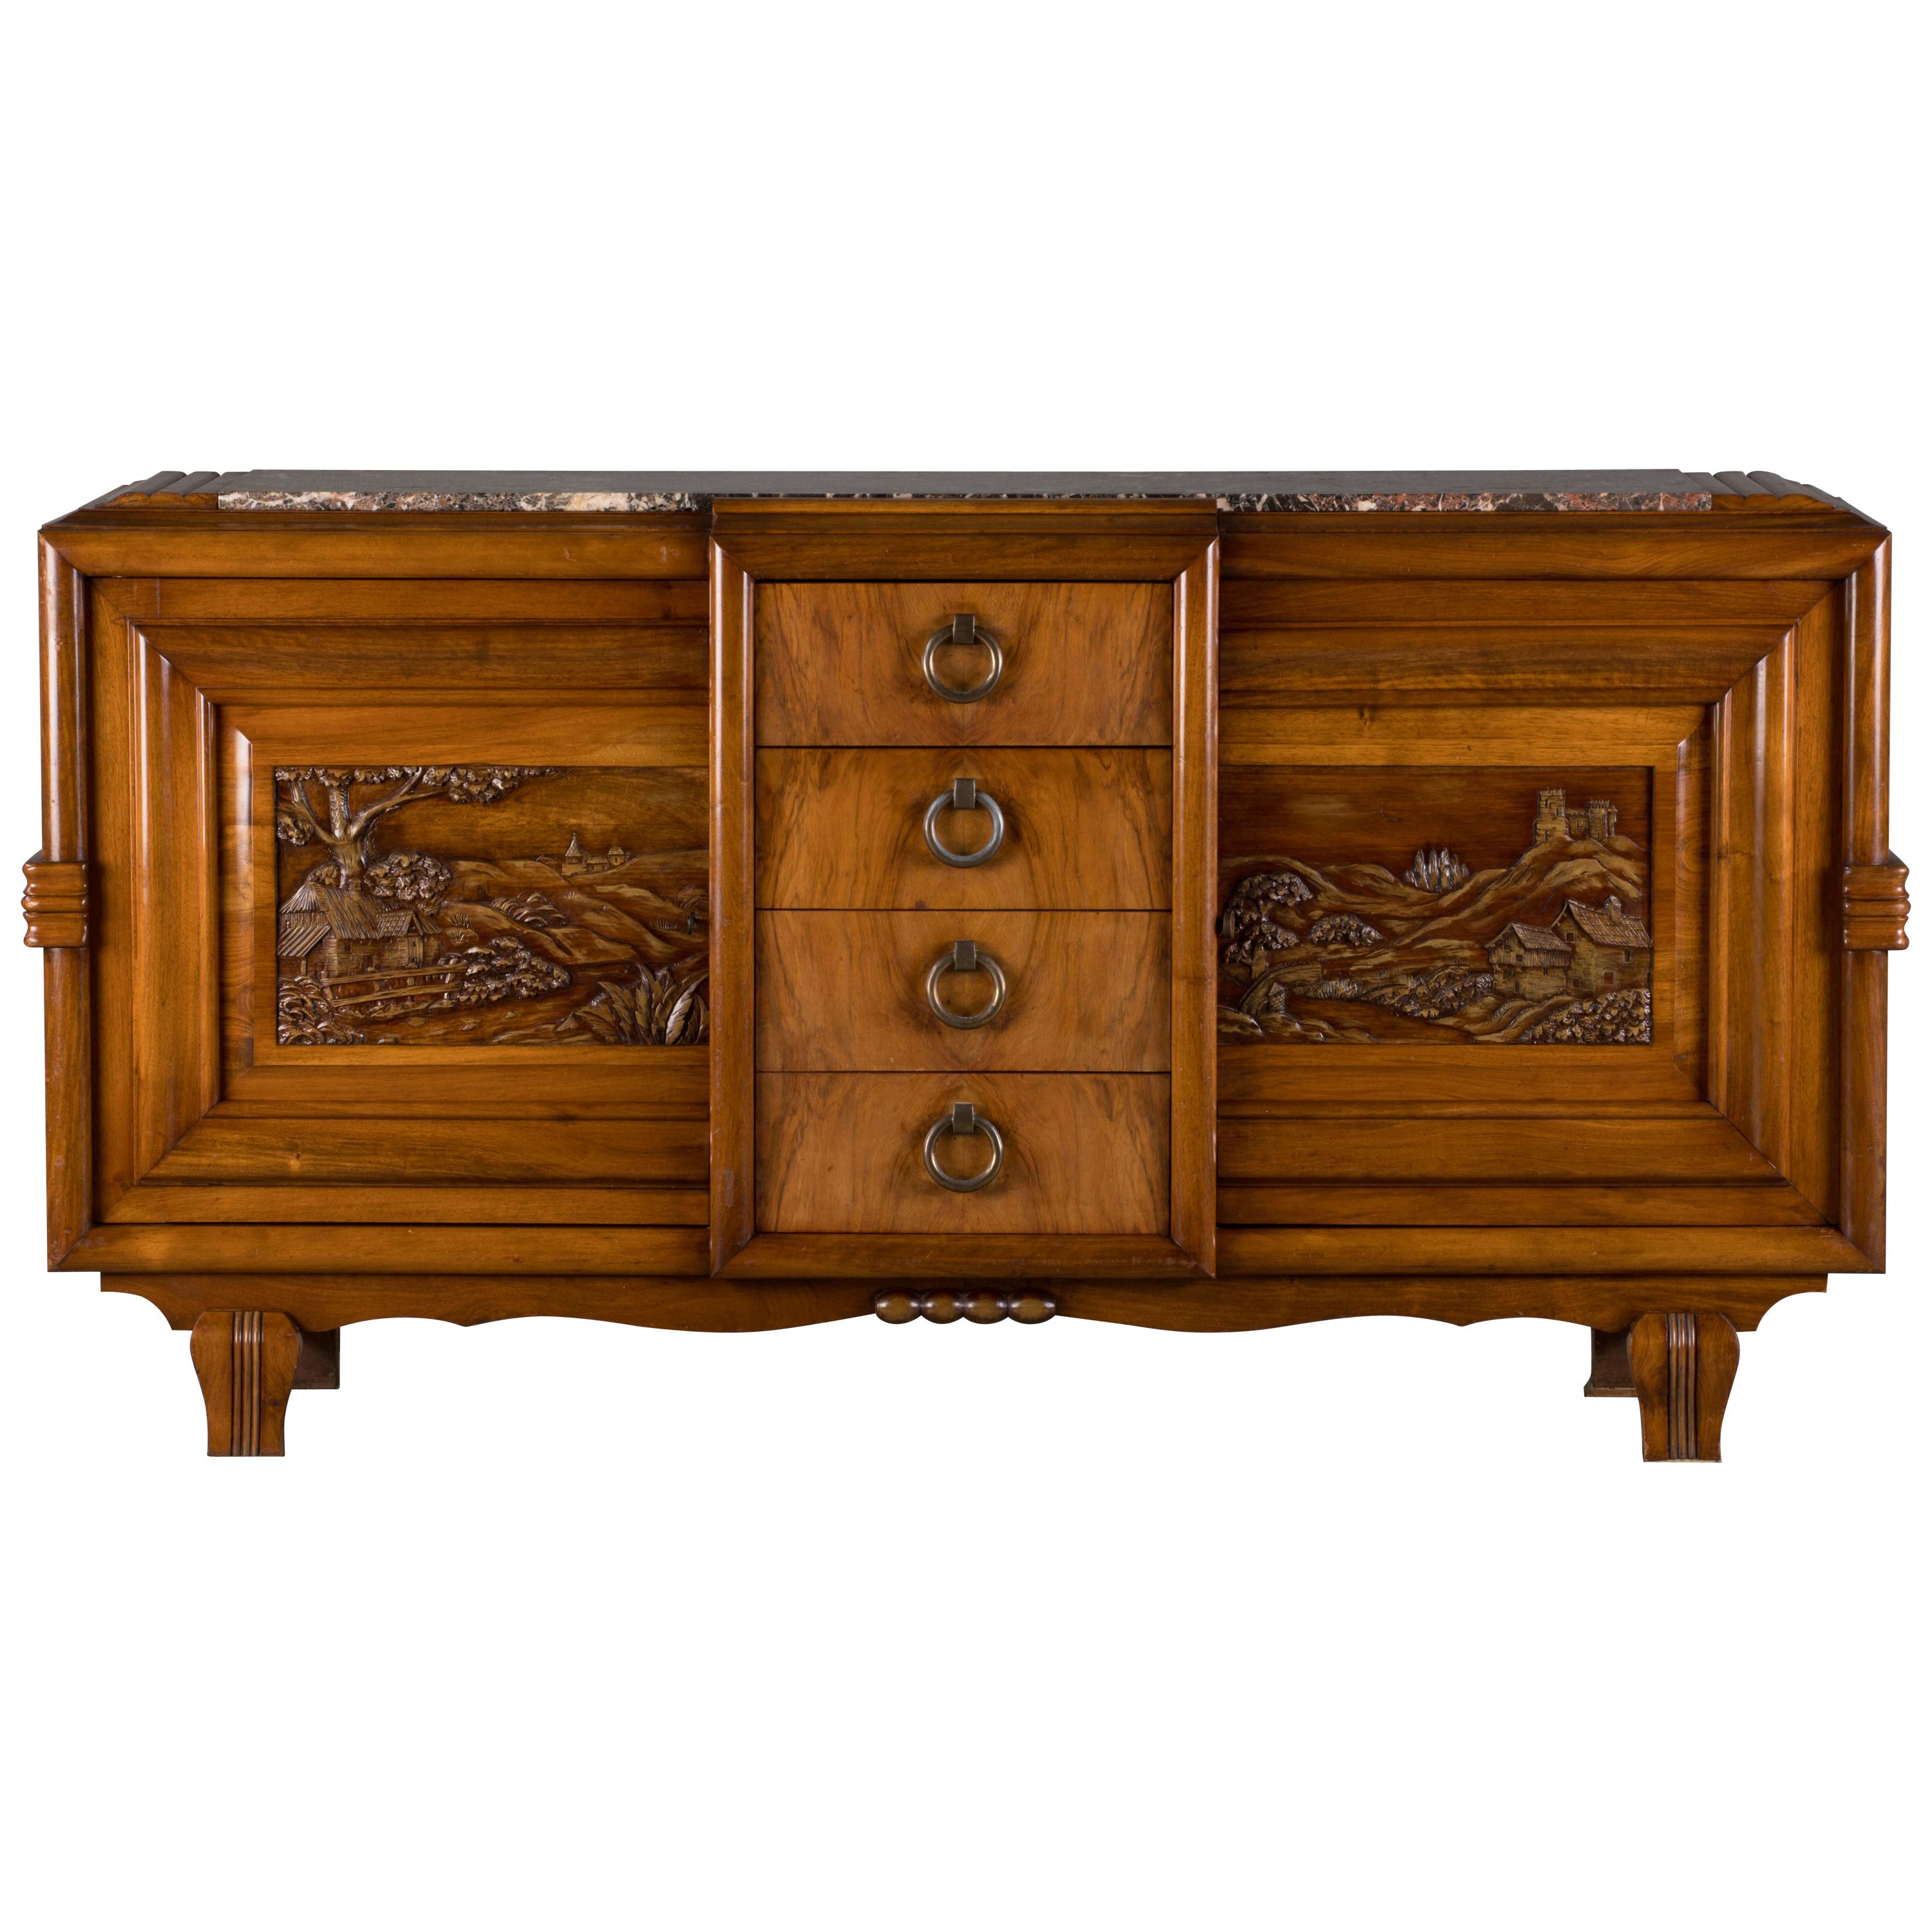 French Mahogany Art Deco Sideboard with Sculptural French Art, 1940s